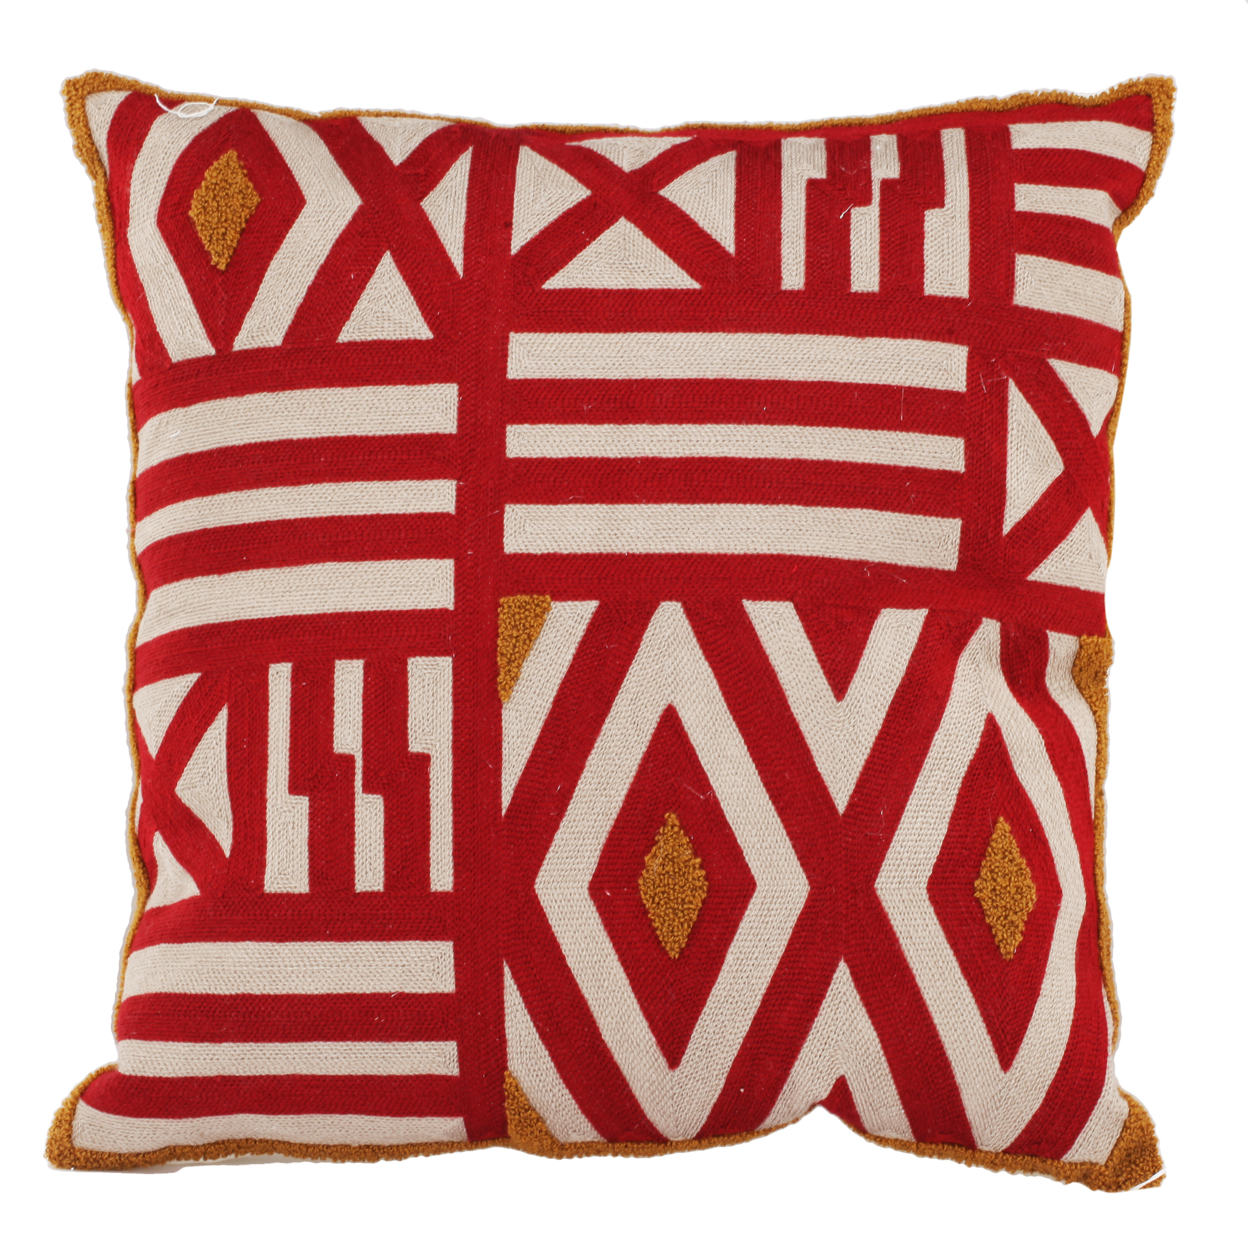 18 X 18 Inch Geometric Embroidered Feather Filled Pillow, Set Of 2,White And Red- Saltoro Sherpi